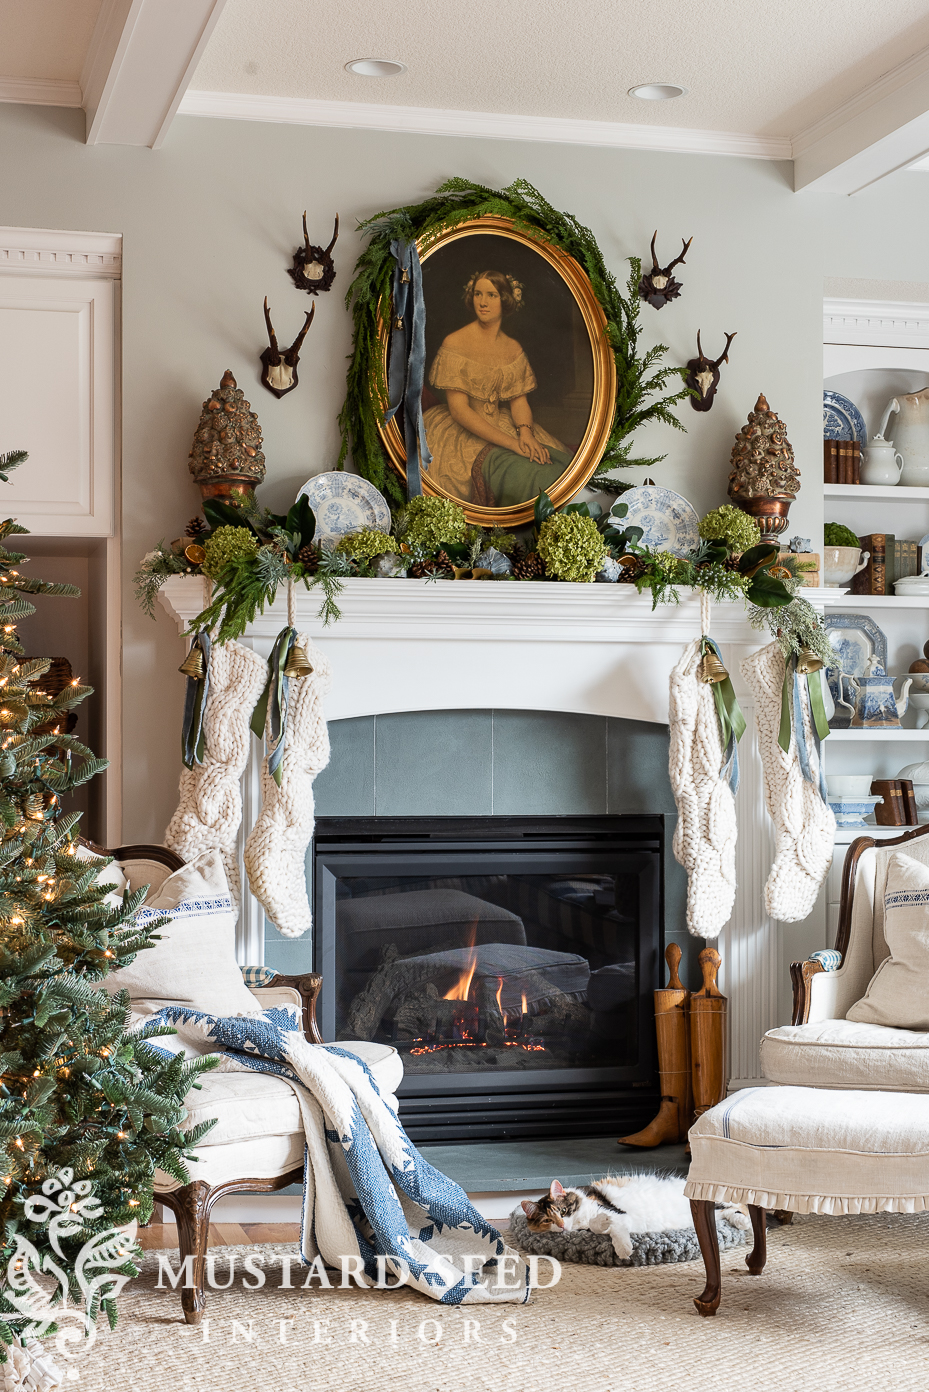 2021 holiday home tour | Christmas decorating | miss mustard seed